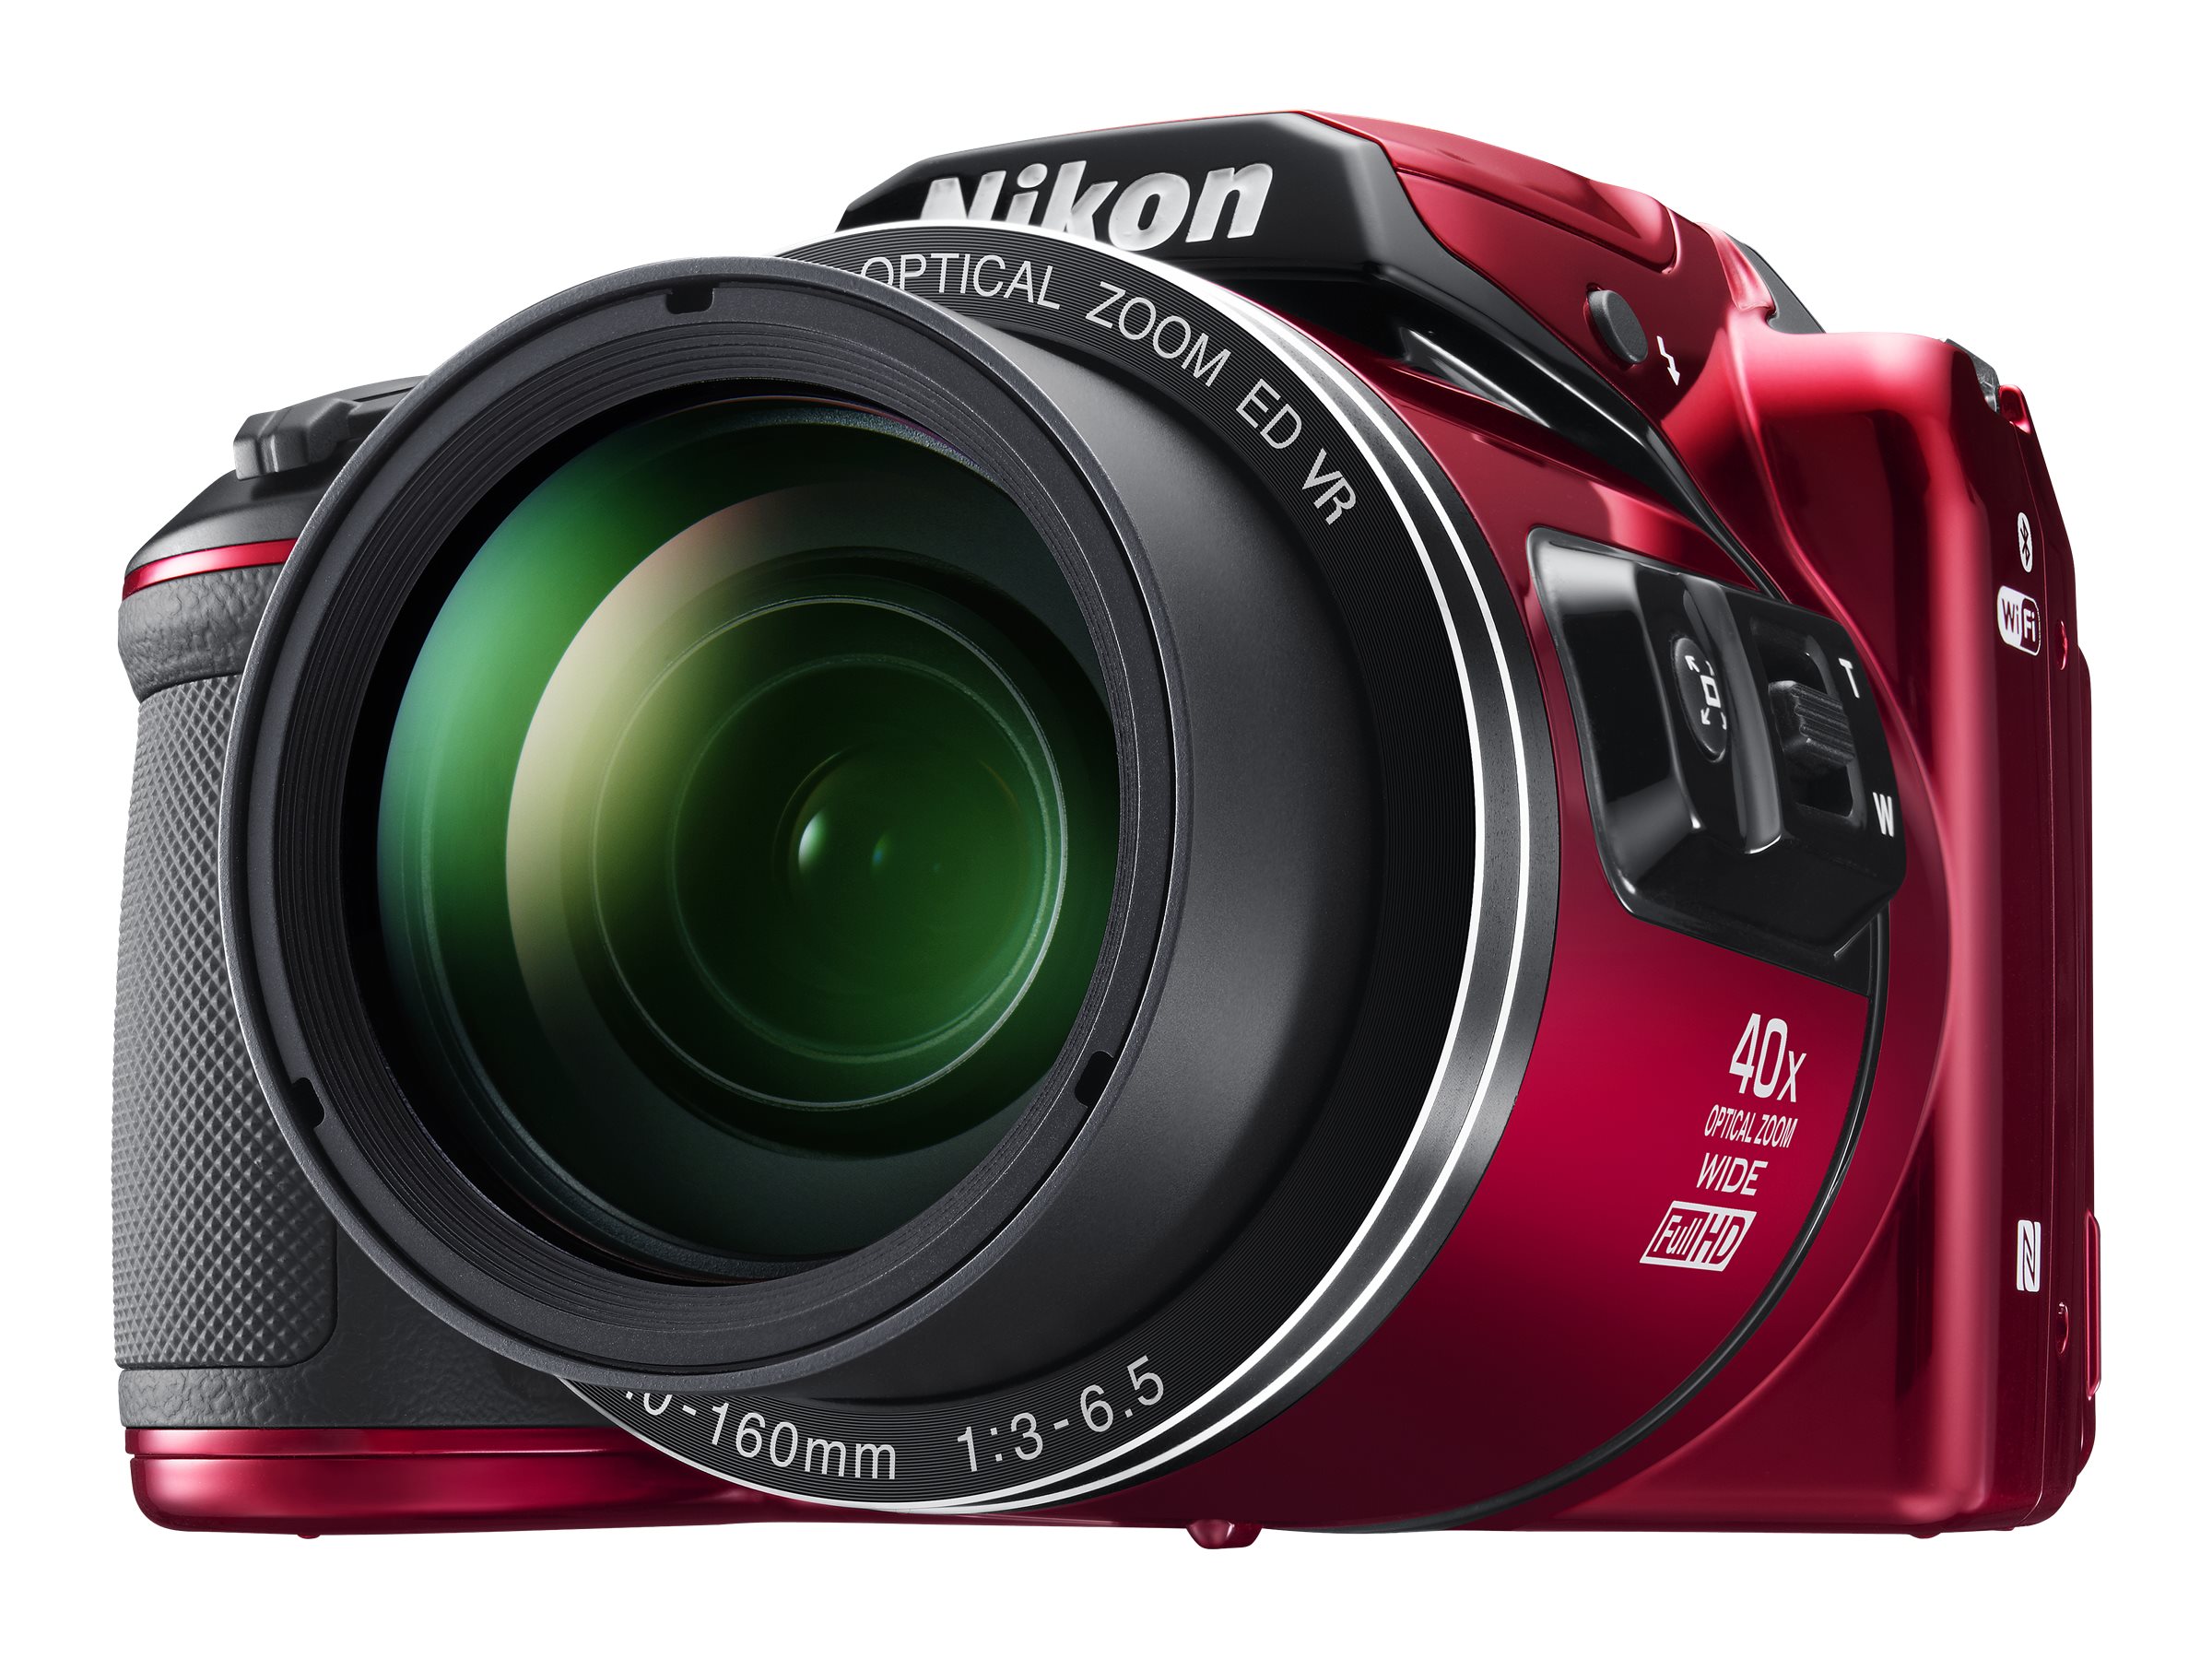 Nikon Red COOLPIX B500 Digital Camera with 16 Megapixels and 40x Optical Zoom - image 2 of 11